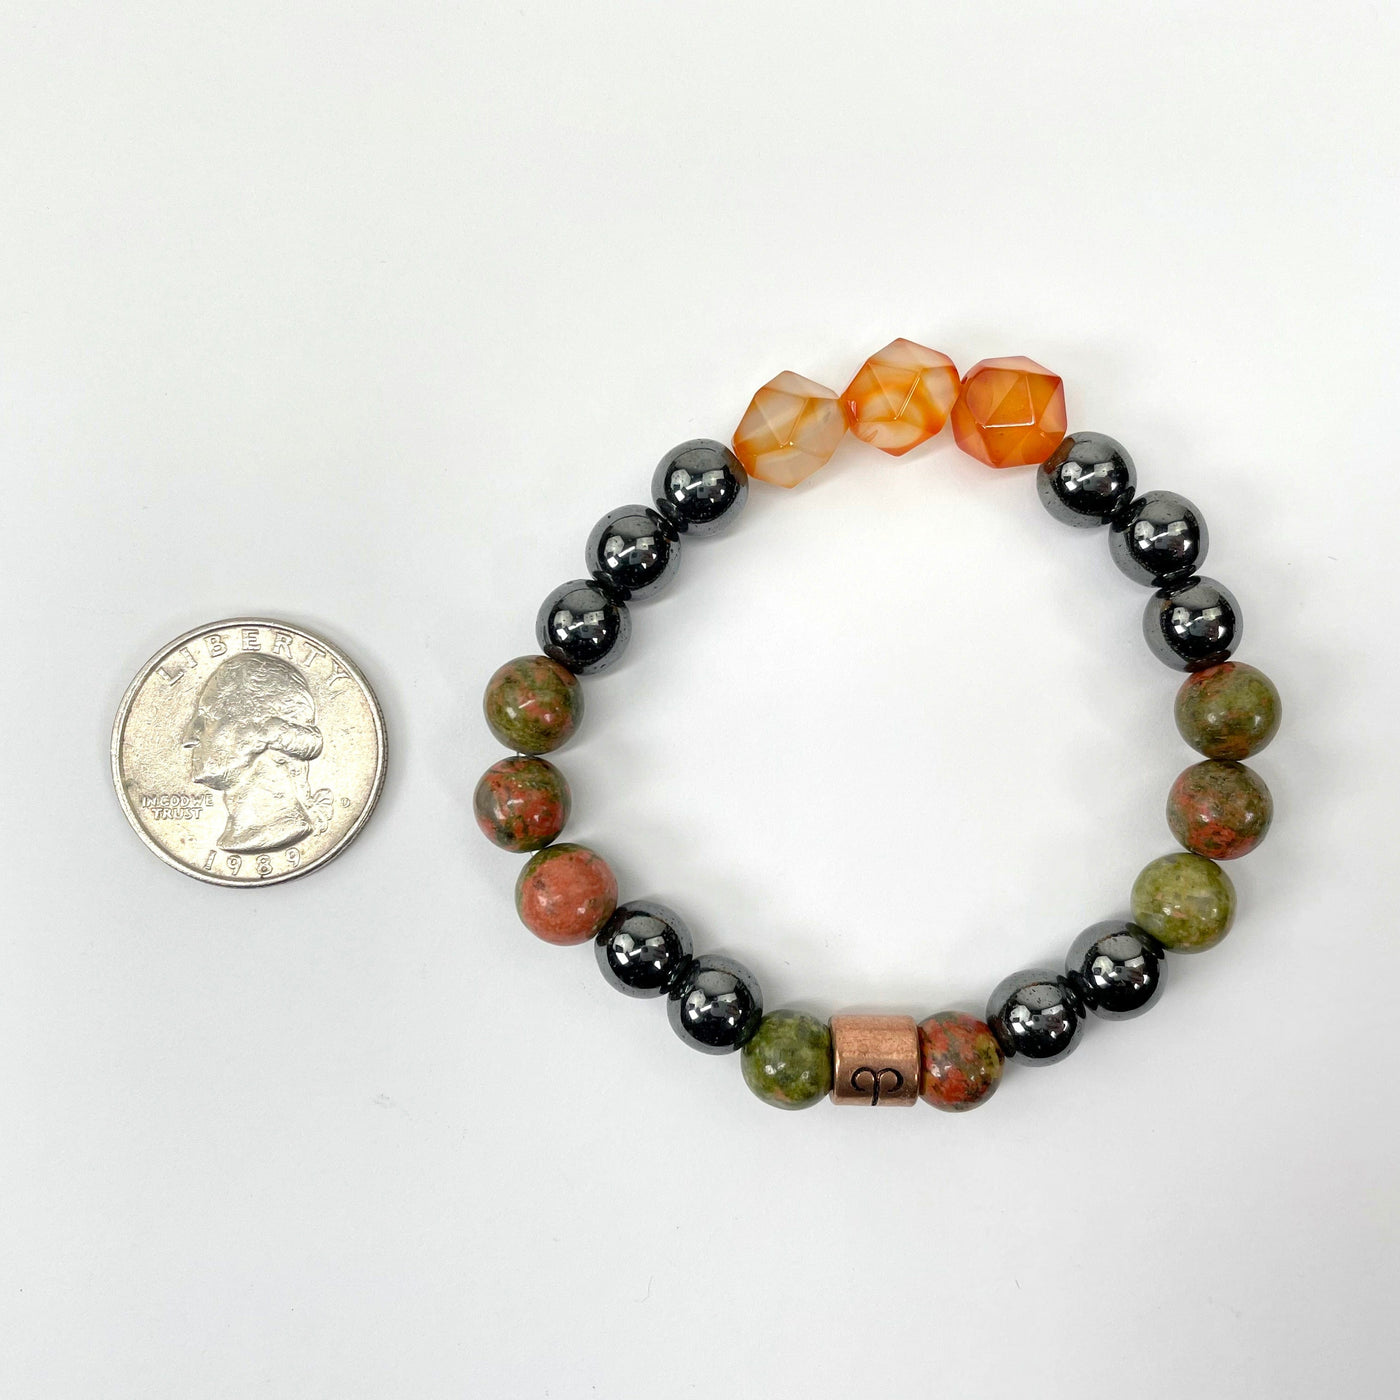 aries zodiac bracelet with quarter for size reference